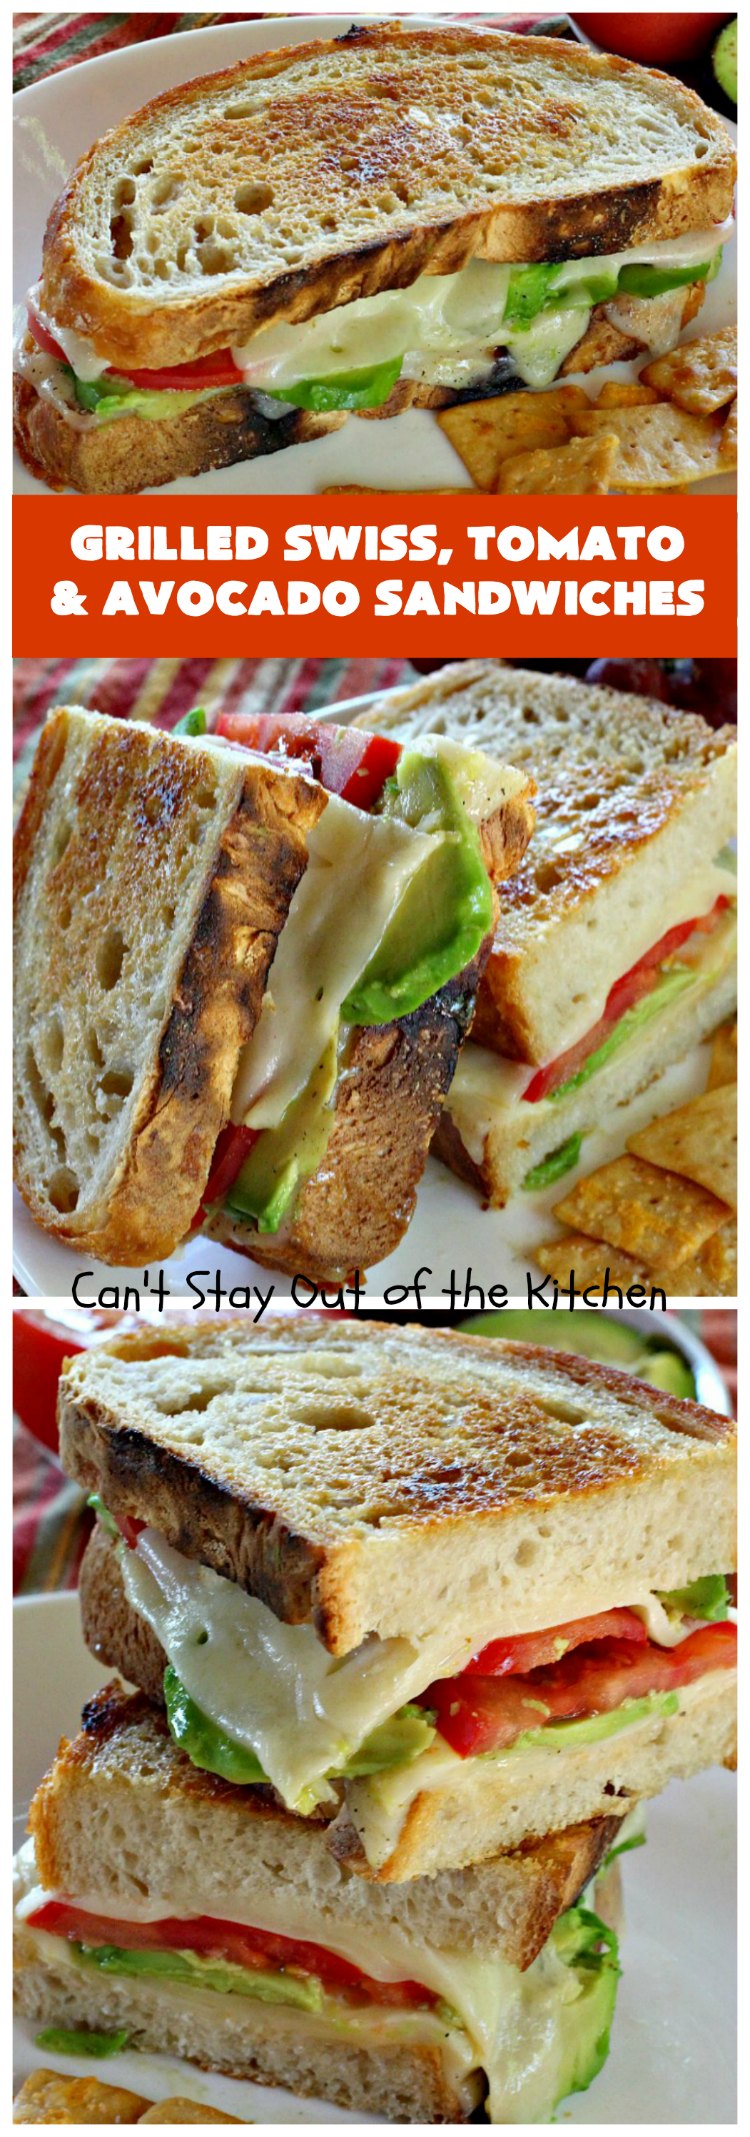 Grilled Swiss, Tomato and Avocado Sandwiches | Can't Stay Out of the Kitchen | these fantastic #sandwiches are always a huge hit when we make them. These are particularly good for a quick weekend lunch or meal when you've been busy with sporting events. Also great for #tailgating parties. #SwissCheese #tomatoes #avocados  #MeatlessMonday #GrilledCheeseSandwiches #GrilledSwissTomatoAndAvocadoSandwiches